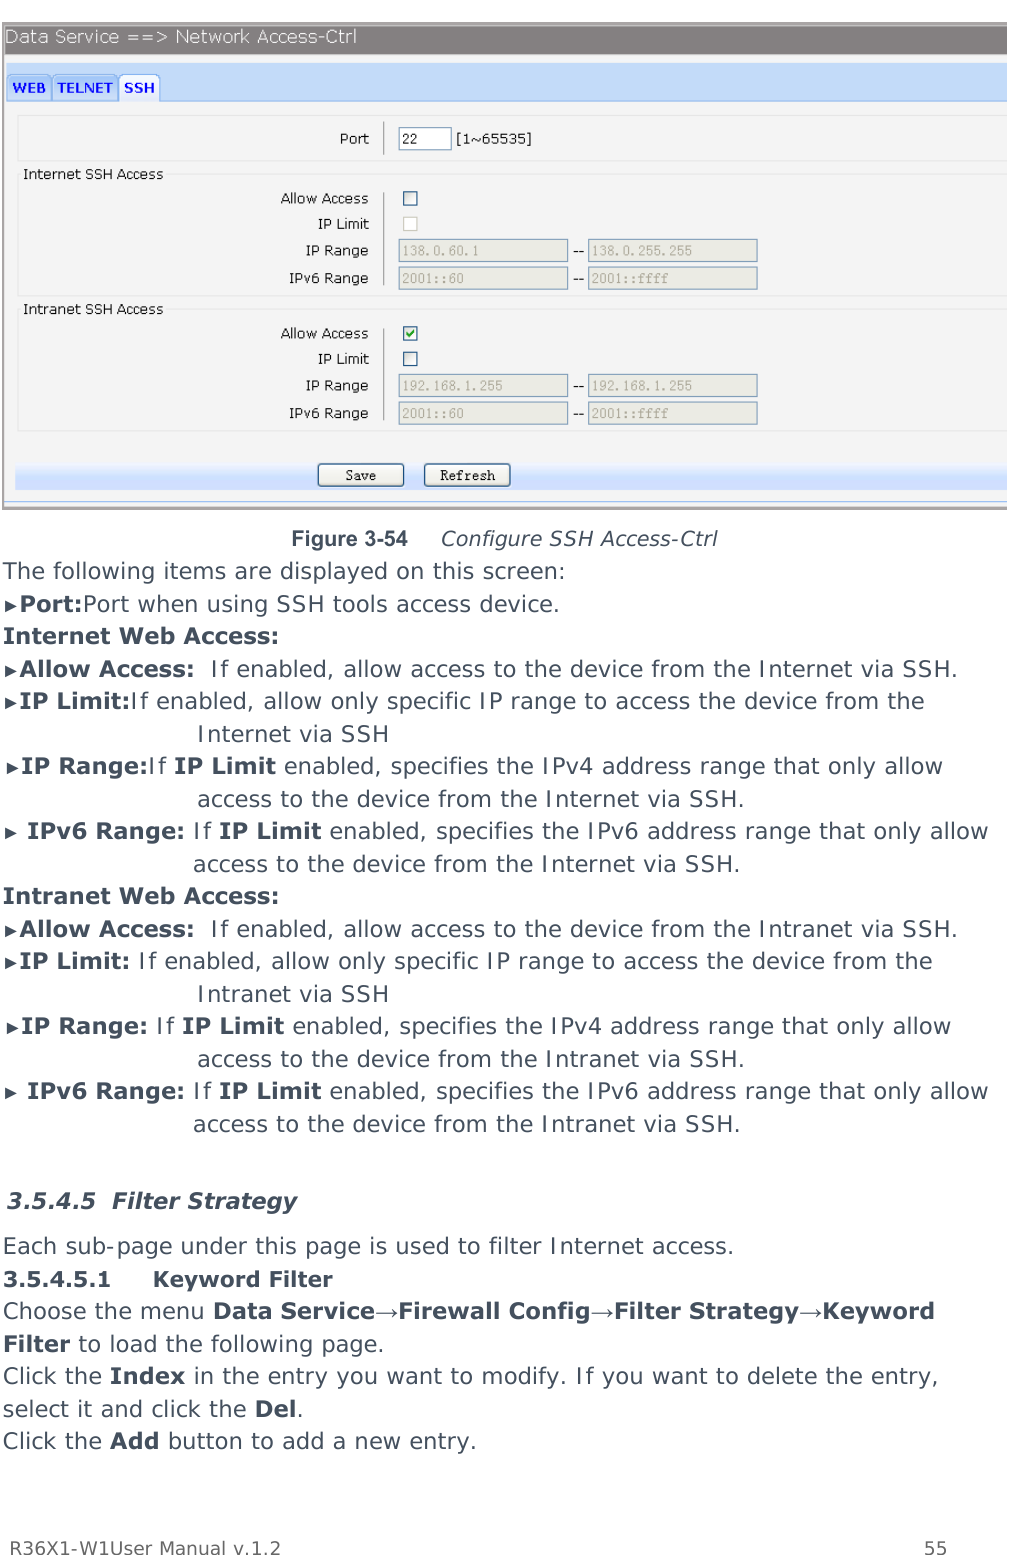           R36X1-W1User Manual v.1.2    55   Figure 3-54  Configure SSH Access-Ctrl The following items are displayed on this screen: ►Port:Port when using SSH tools access device. Internet Web Access: ►Allow Access:  If enabled, allow access to the device from the Internet via SSH. ►IP Limit:If enabled, allow only specific IP range to access the device from the Internet via SSH ►IP Range:If IP Limit enabled, specifies the IPv4 address range that only allow access to the device from the Internet via SSH. ► IPv6 Range: If IP Limit enabled, specifies the IPv6 address range that only allow access to the device from the Internet via SSH. Intranet Web Access: ►Allow Access:  If enabled, allow access to the device from the Intranet via SSH. ►IP Limit: If enabled, allow only specific IP range to access the device from the Intranet via SSH ►IP Range: If IP Limit enabled, specifies the IPv4 address range that only allow access to the device from the Intranet via SSH. ► IPv6 Range: If IP Limit enabled, specifies the IPv6 address range that only allow access to the device from the Intranet via SSH.  3.5.4.5 Filter Strategy Each sub-page under this page is used to filter Internet access. 3.5.4.5.1 Keyword Filter Choose the menu Data Service→Firewall Config→Filter Strategy→Keyword Filter to load the following page. Click the Index in the entry you want to modify. If you want to delete the entry, select it and click the Del. Click the Add button to add a new entry. 